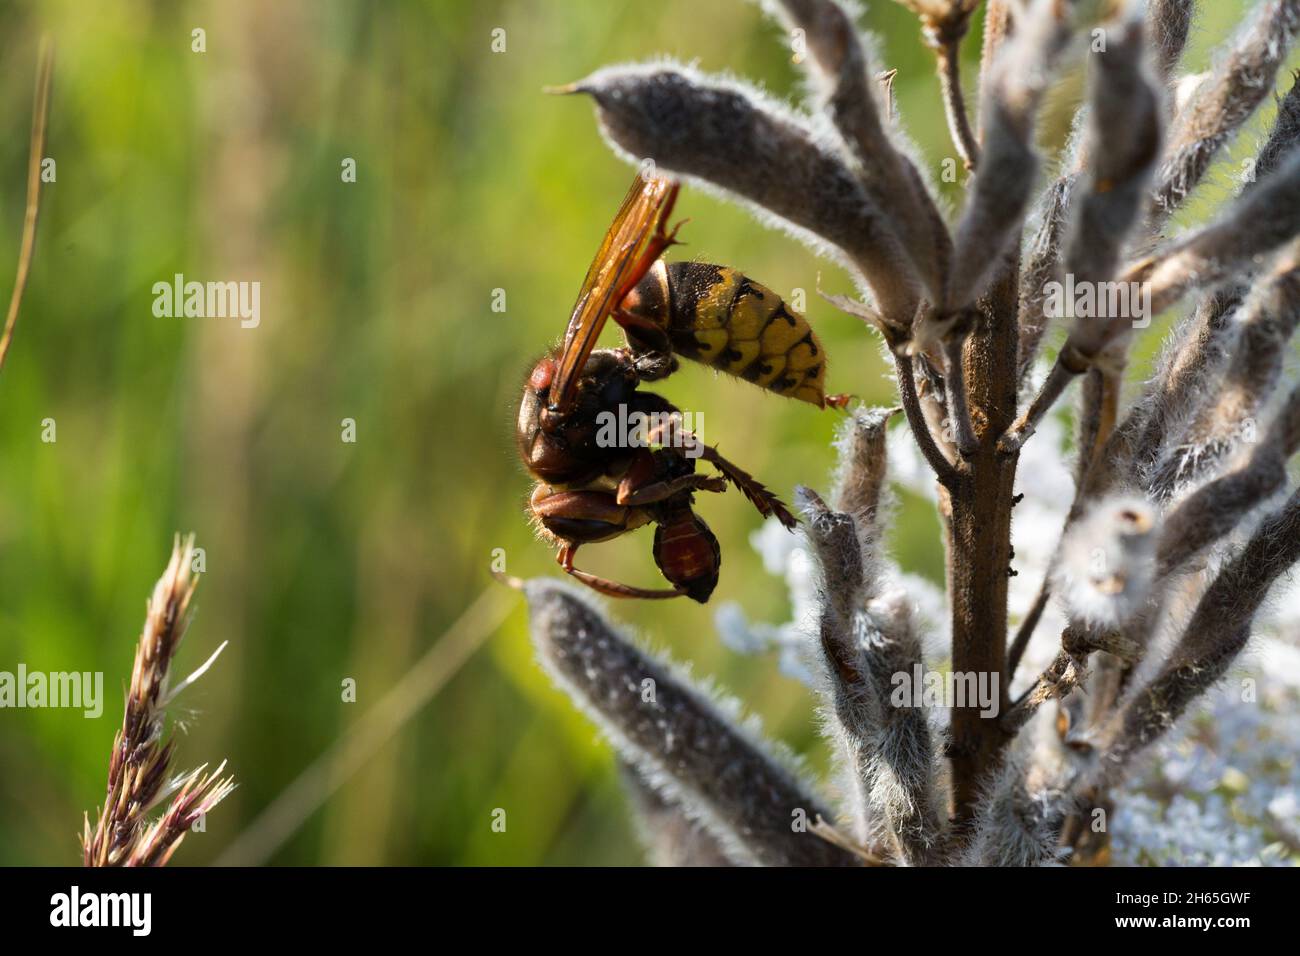 Selective focus shot of hornet on a plant Stock Photo